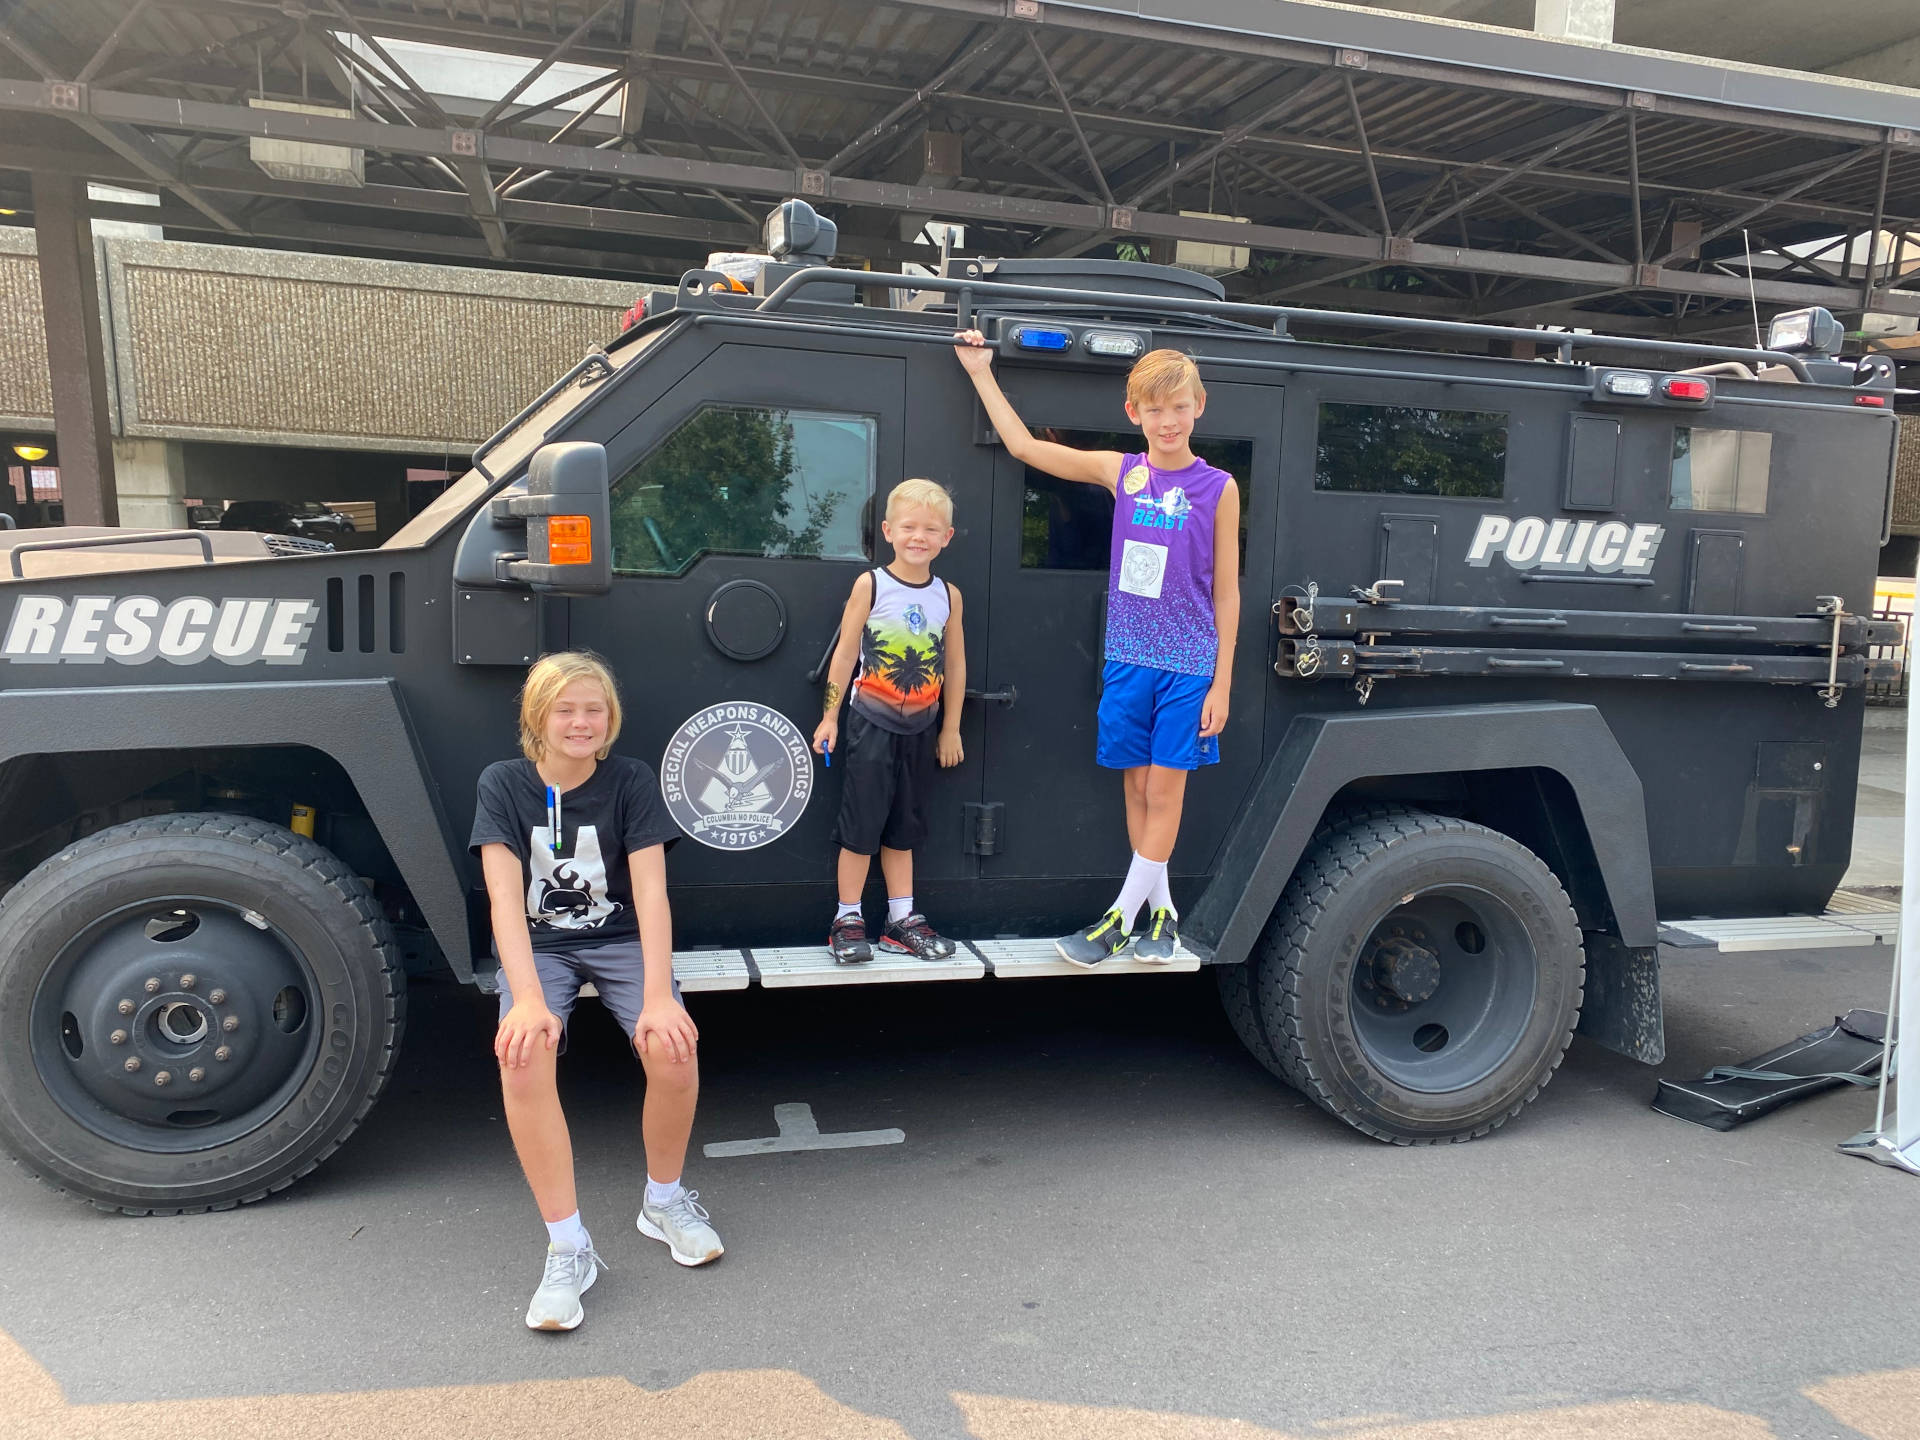 Fair participants take a break from exploring CPD’s SWAT Vehicle to pose for a photo.